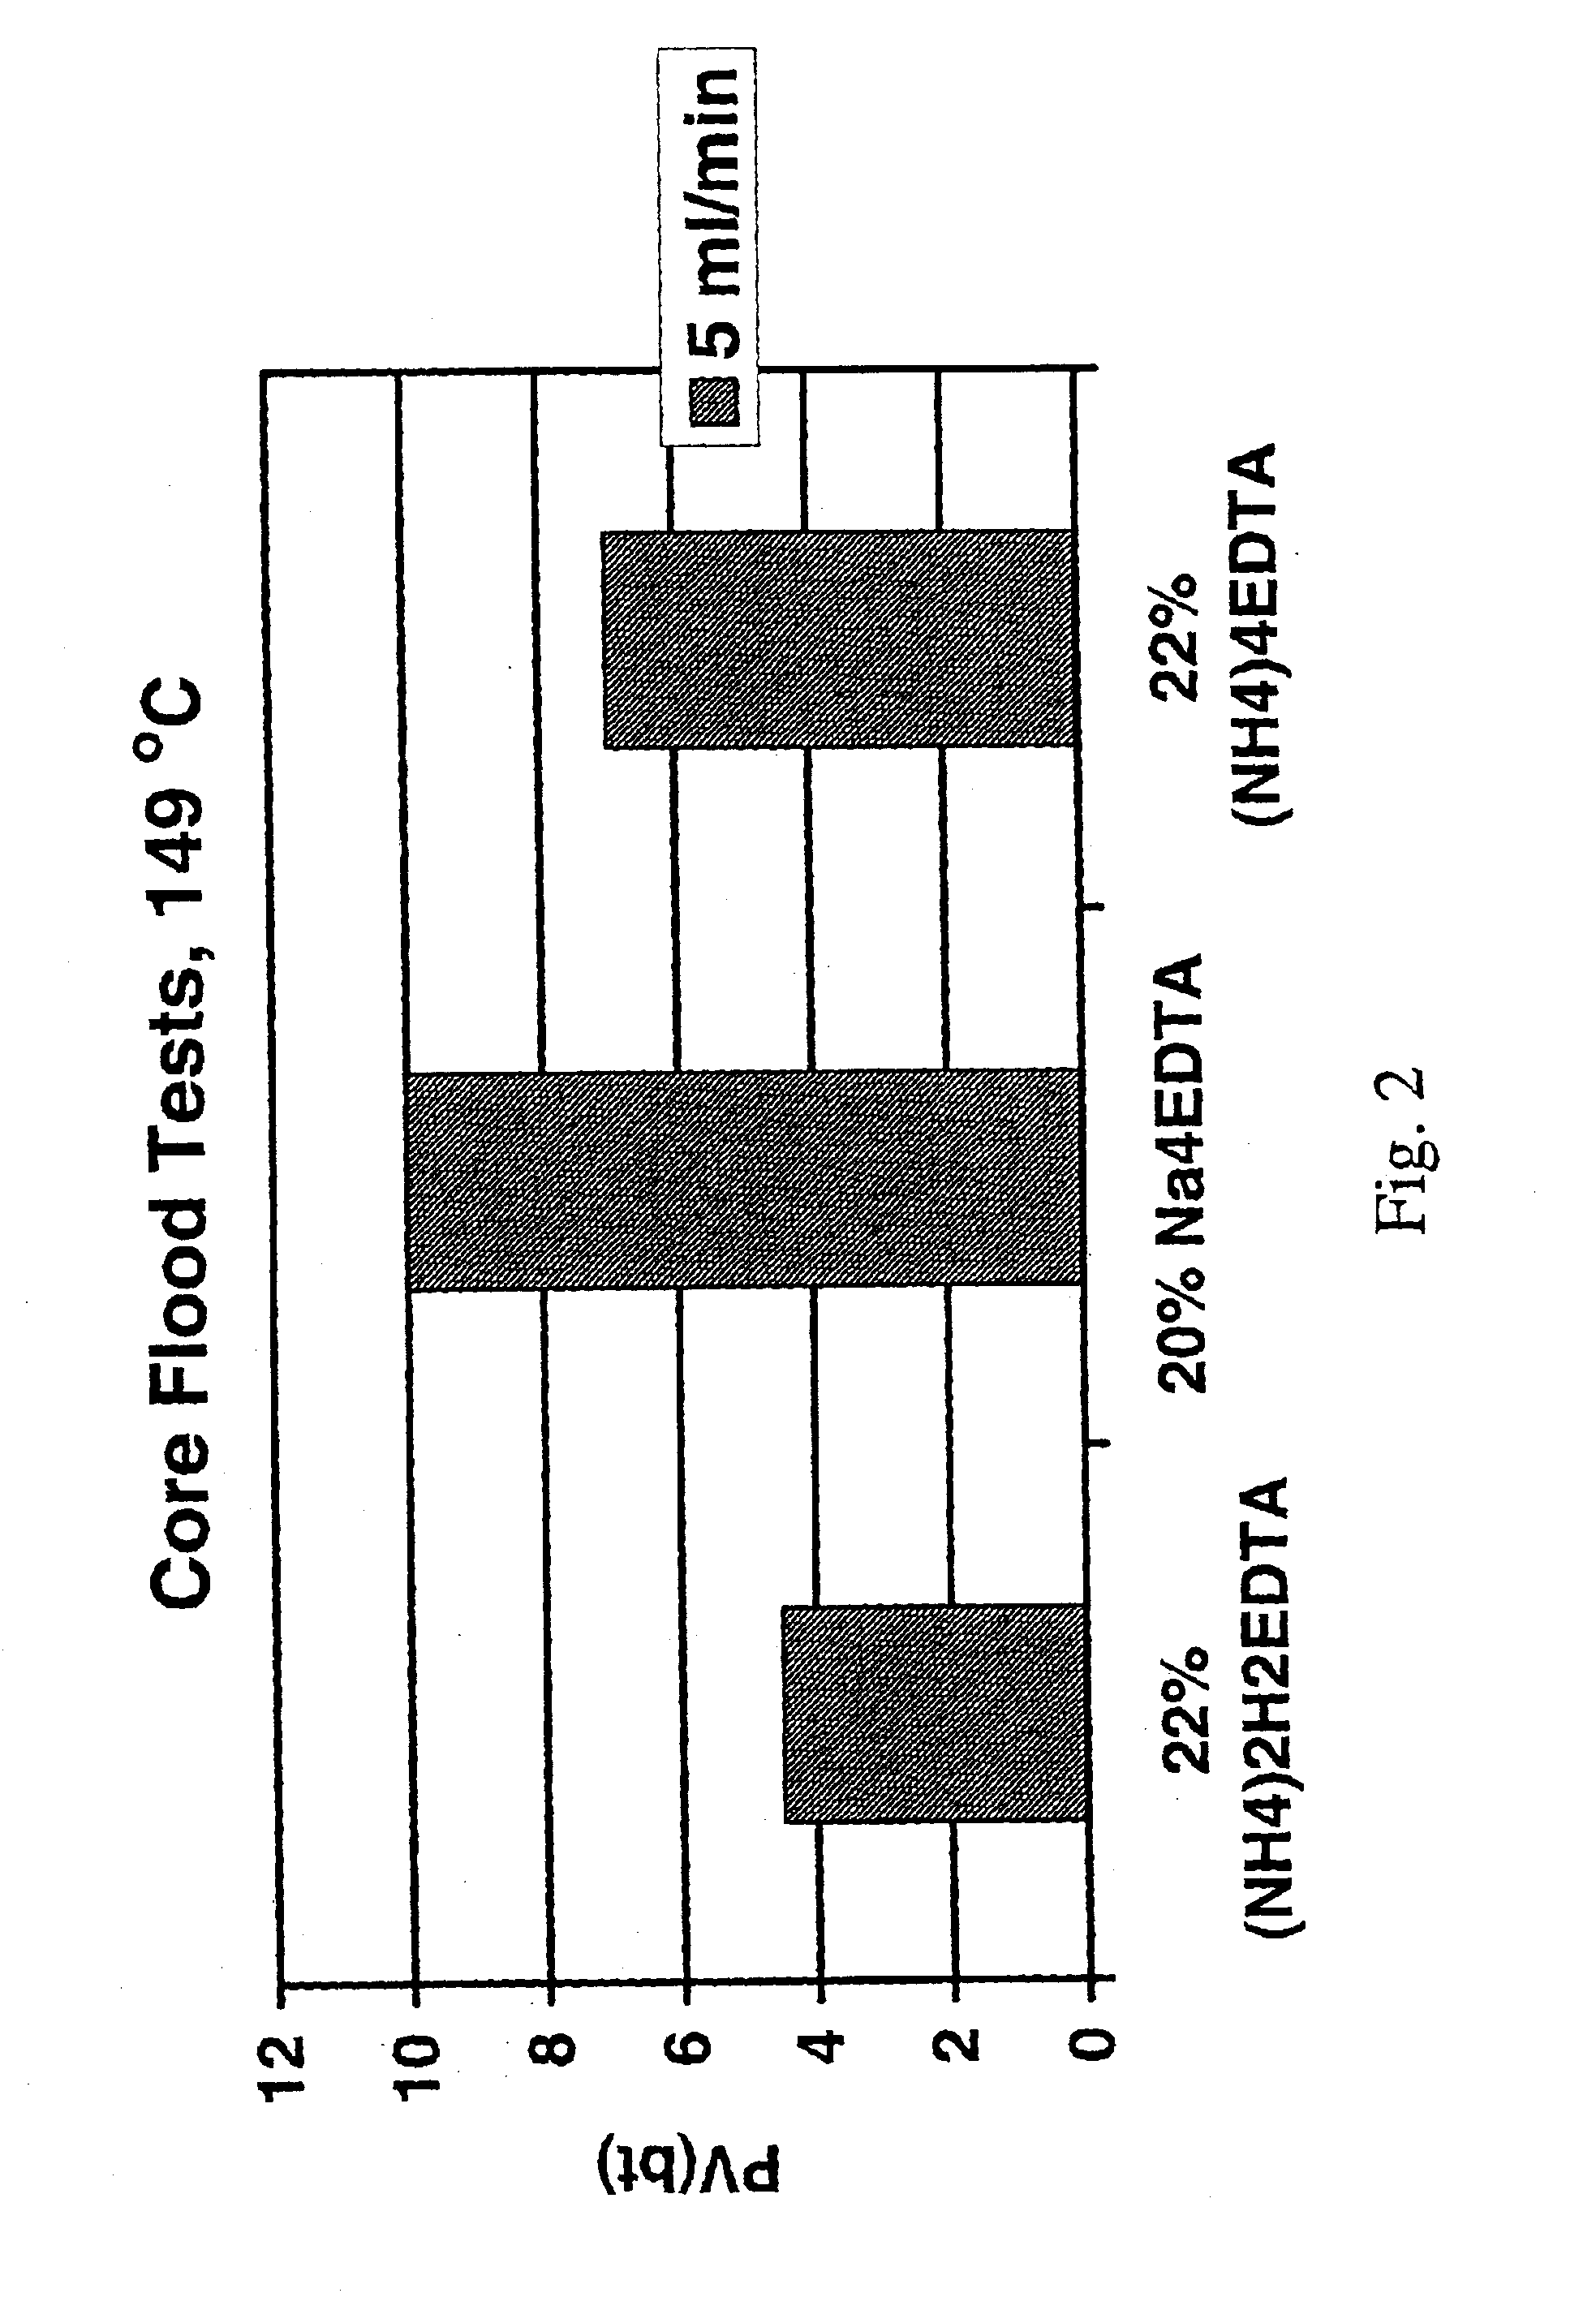 Method for treating a subterranean formation